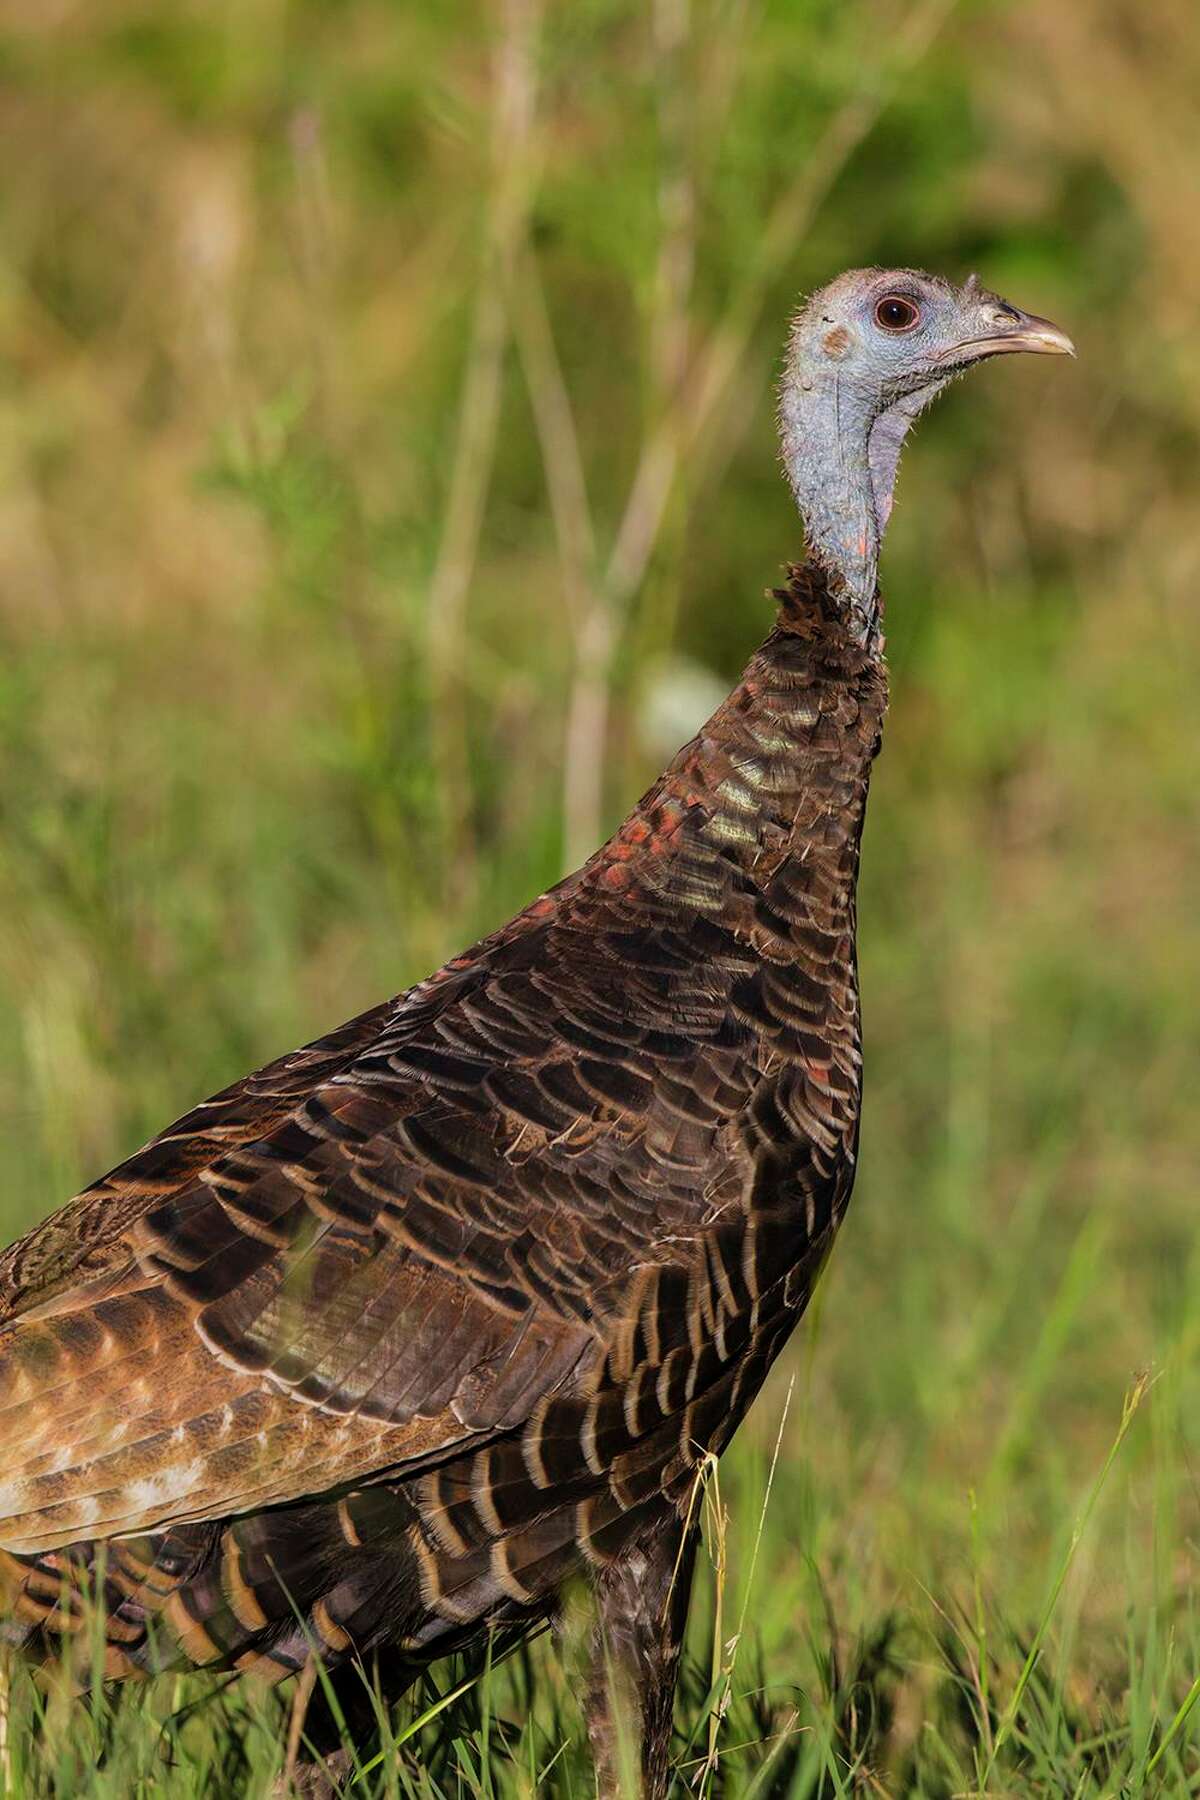 Wild turkeys are endemic to North America. European poultry farmers produced our domesticated barnyard turkeys.